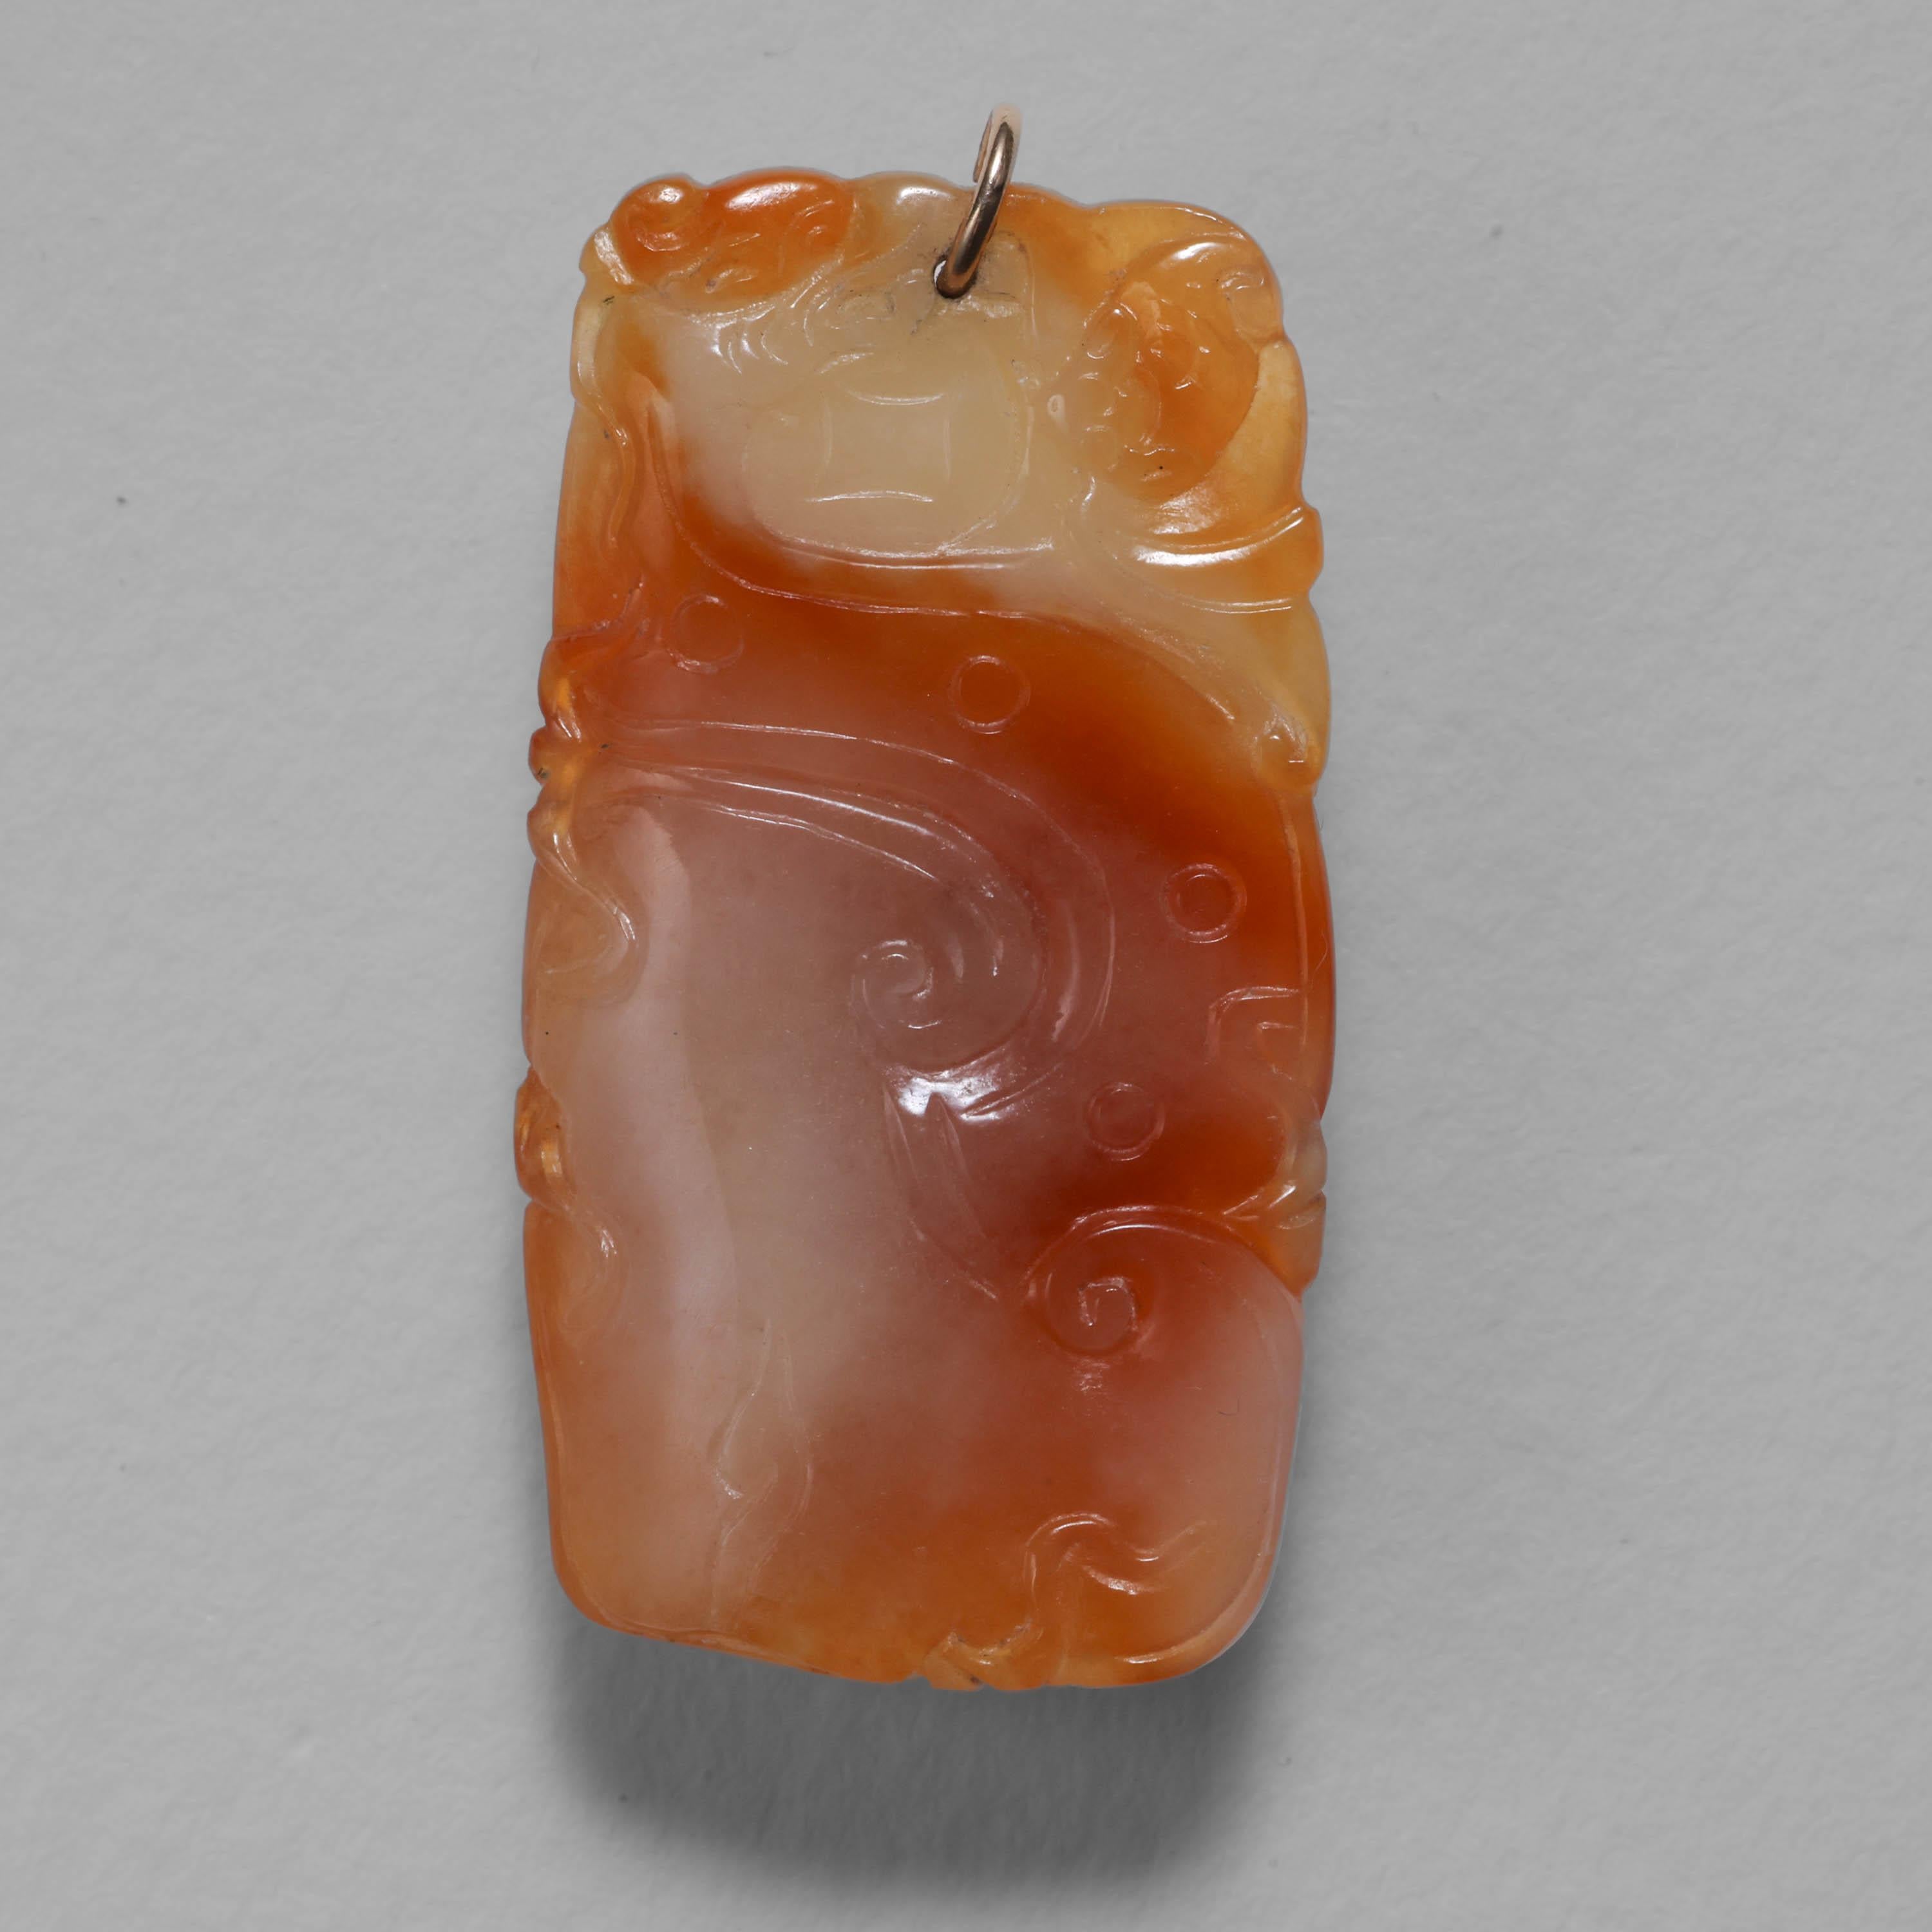 This astonishing Art Deco (circa 1930) jade pendant is the color of homemade caramel. In fact, it's the color of the caramel just after you have melted the sugar to a golden syrup and are stirring in the thick, sweet cream. Hand-carved around 1920